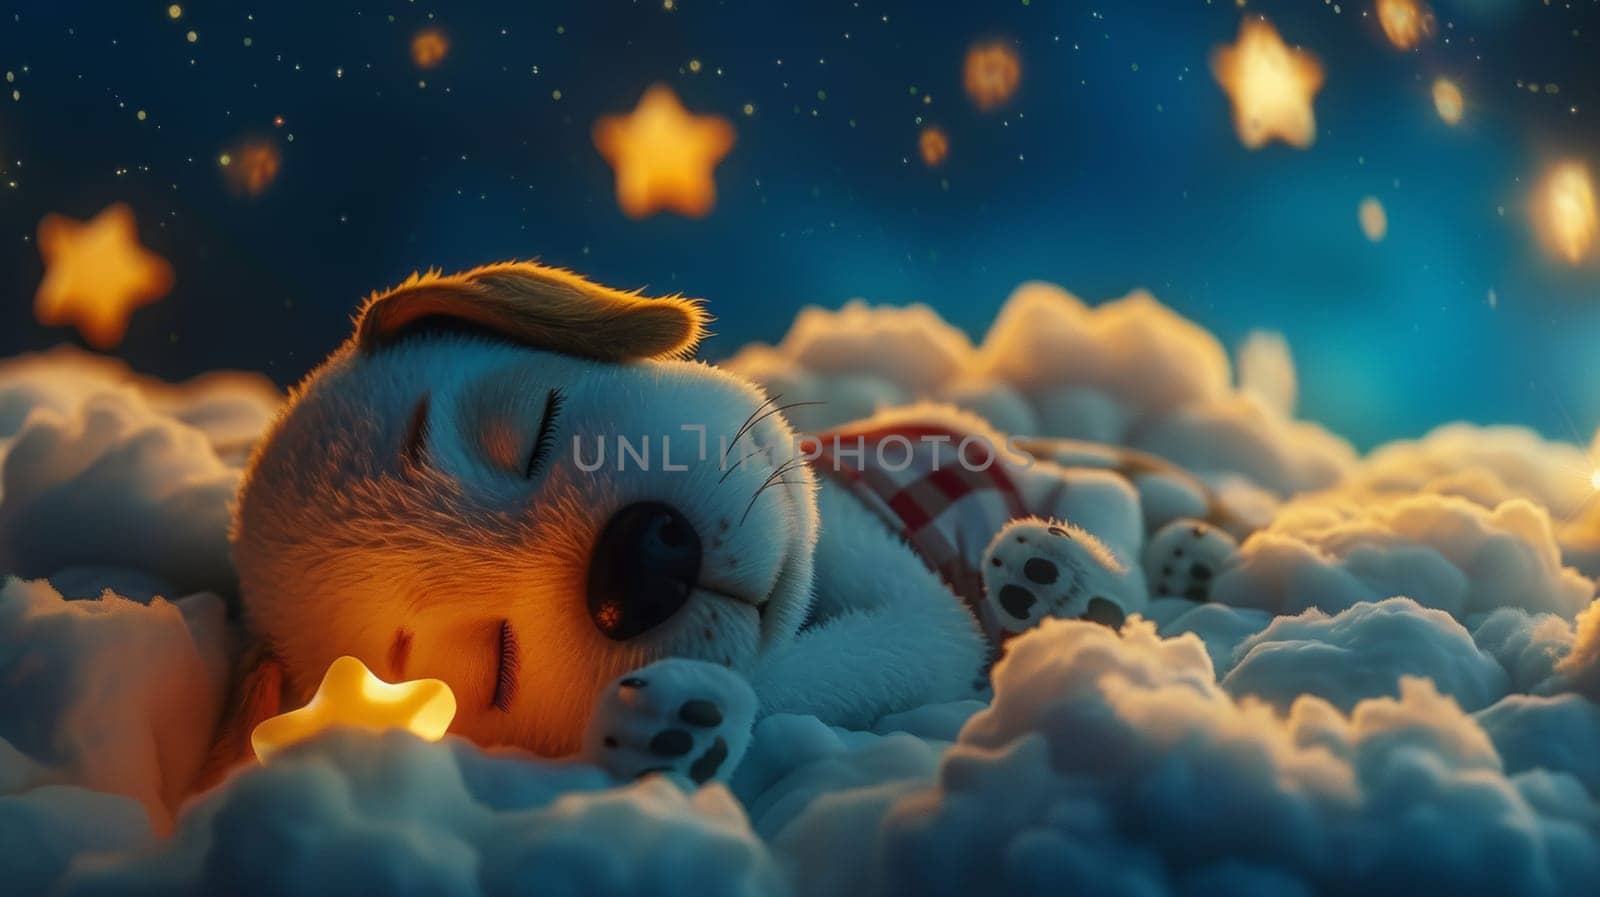 A cute little puppy sleeping on a cloud with stars